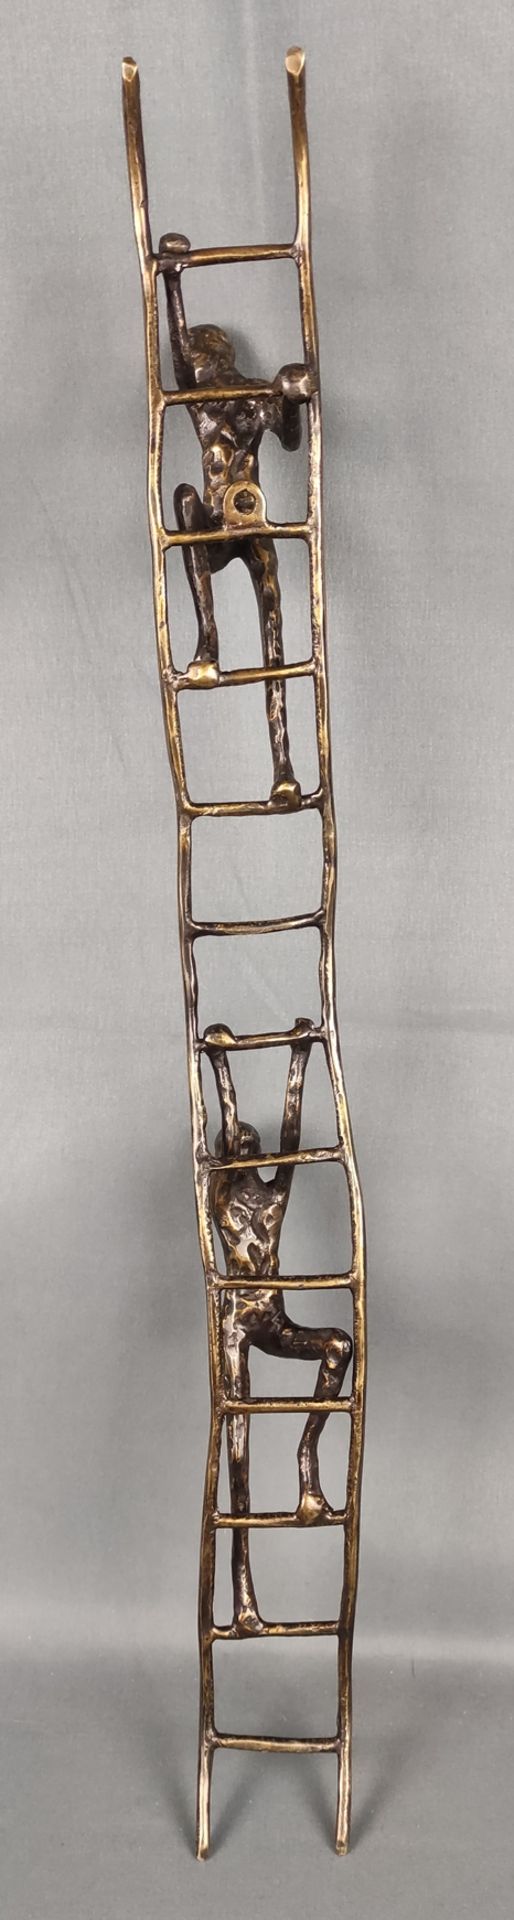 Unknown (20th century) "Climbing men", two male figures climbing up a ladder, bronze, l 56 cm - Image 3 of 3